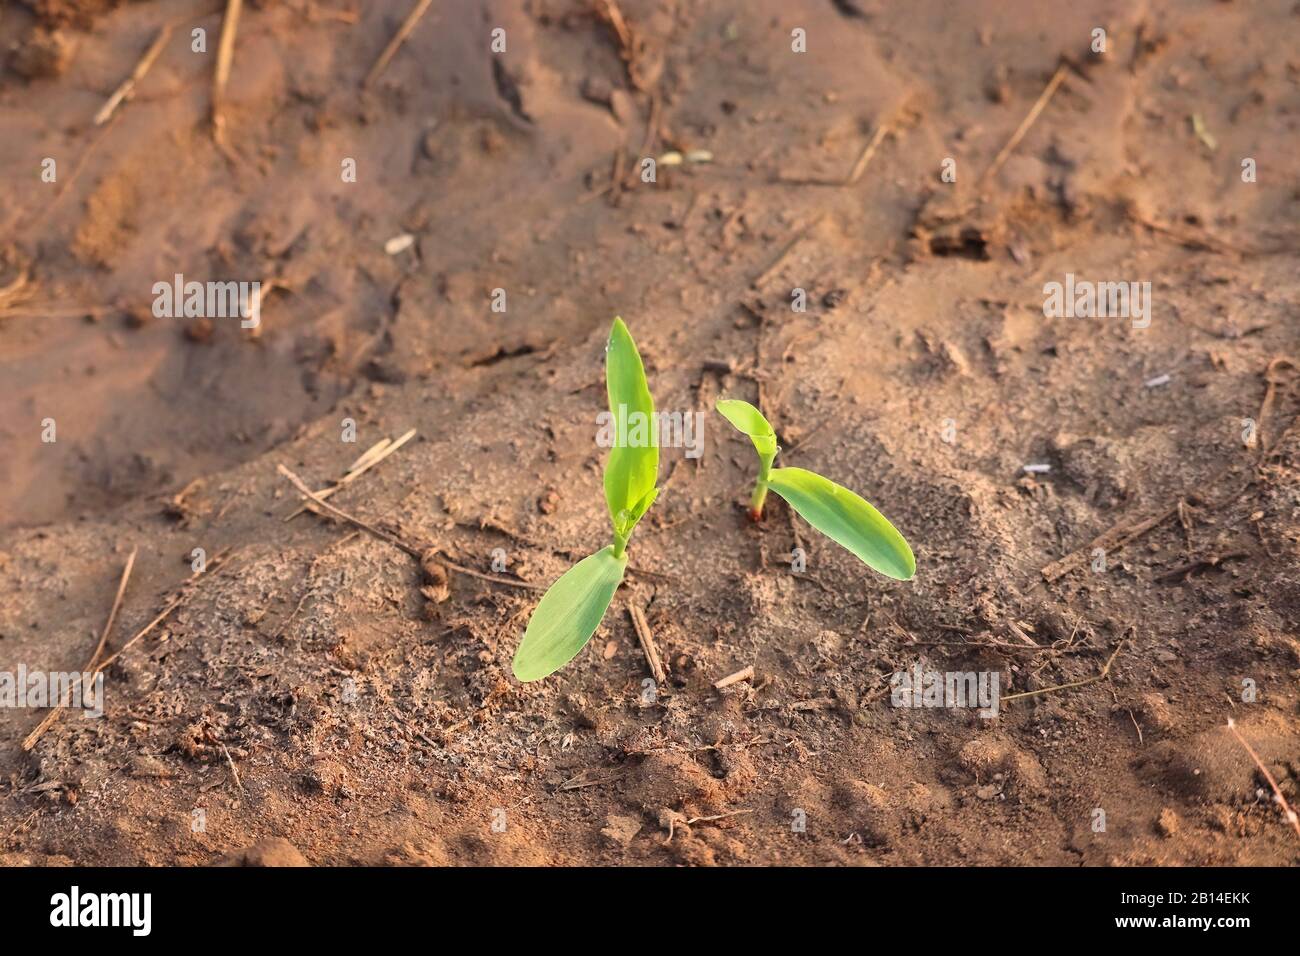 two plants growing on ground with natural light background, plant texture or pattern for design, copy space background, corn plant image Stock Photo